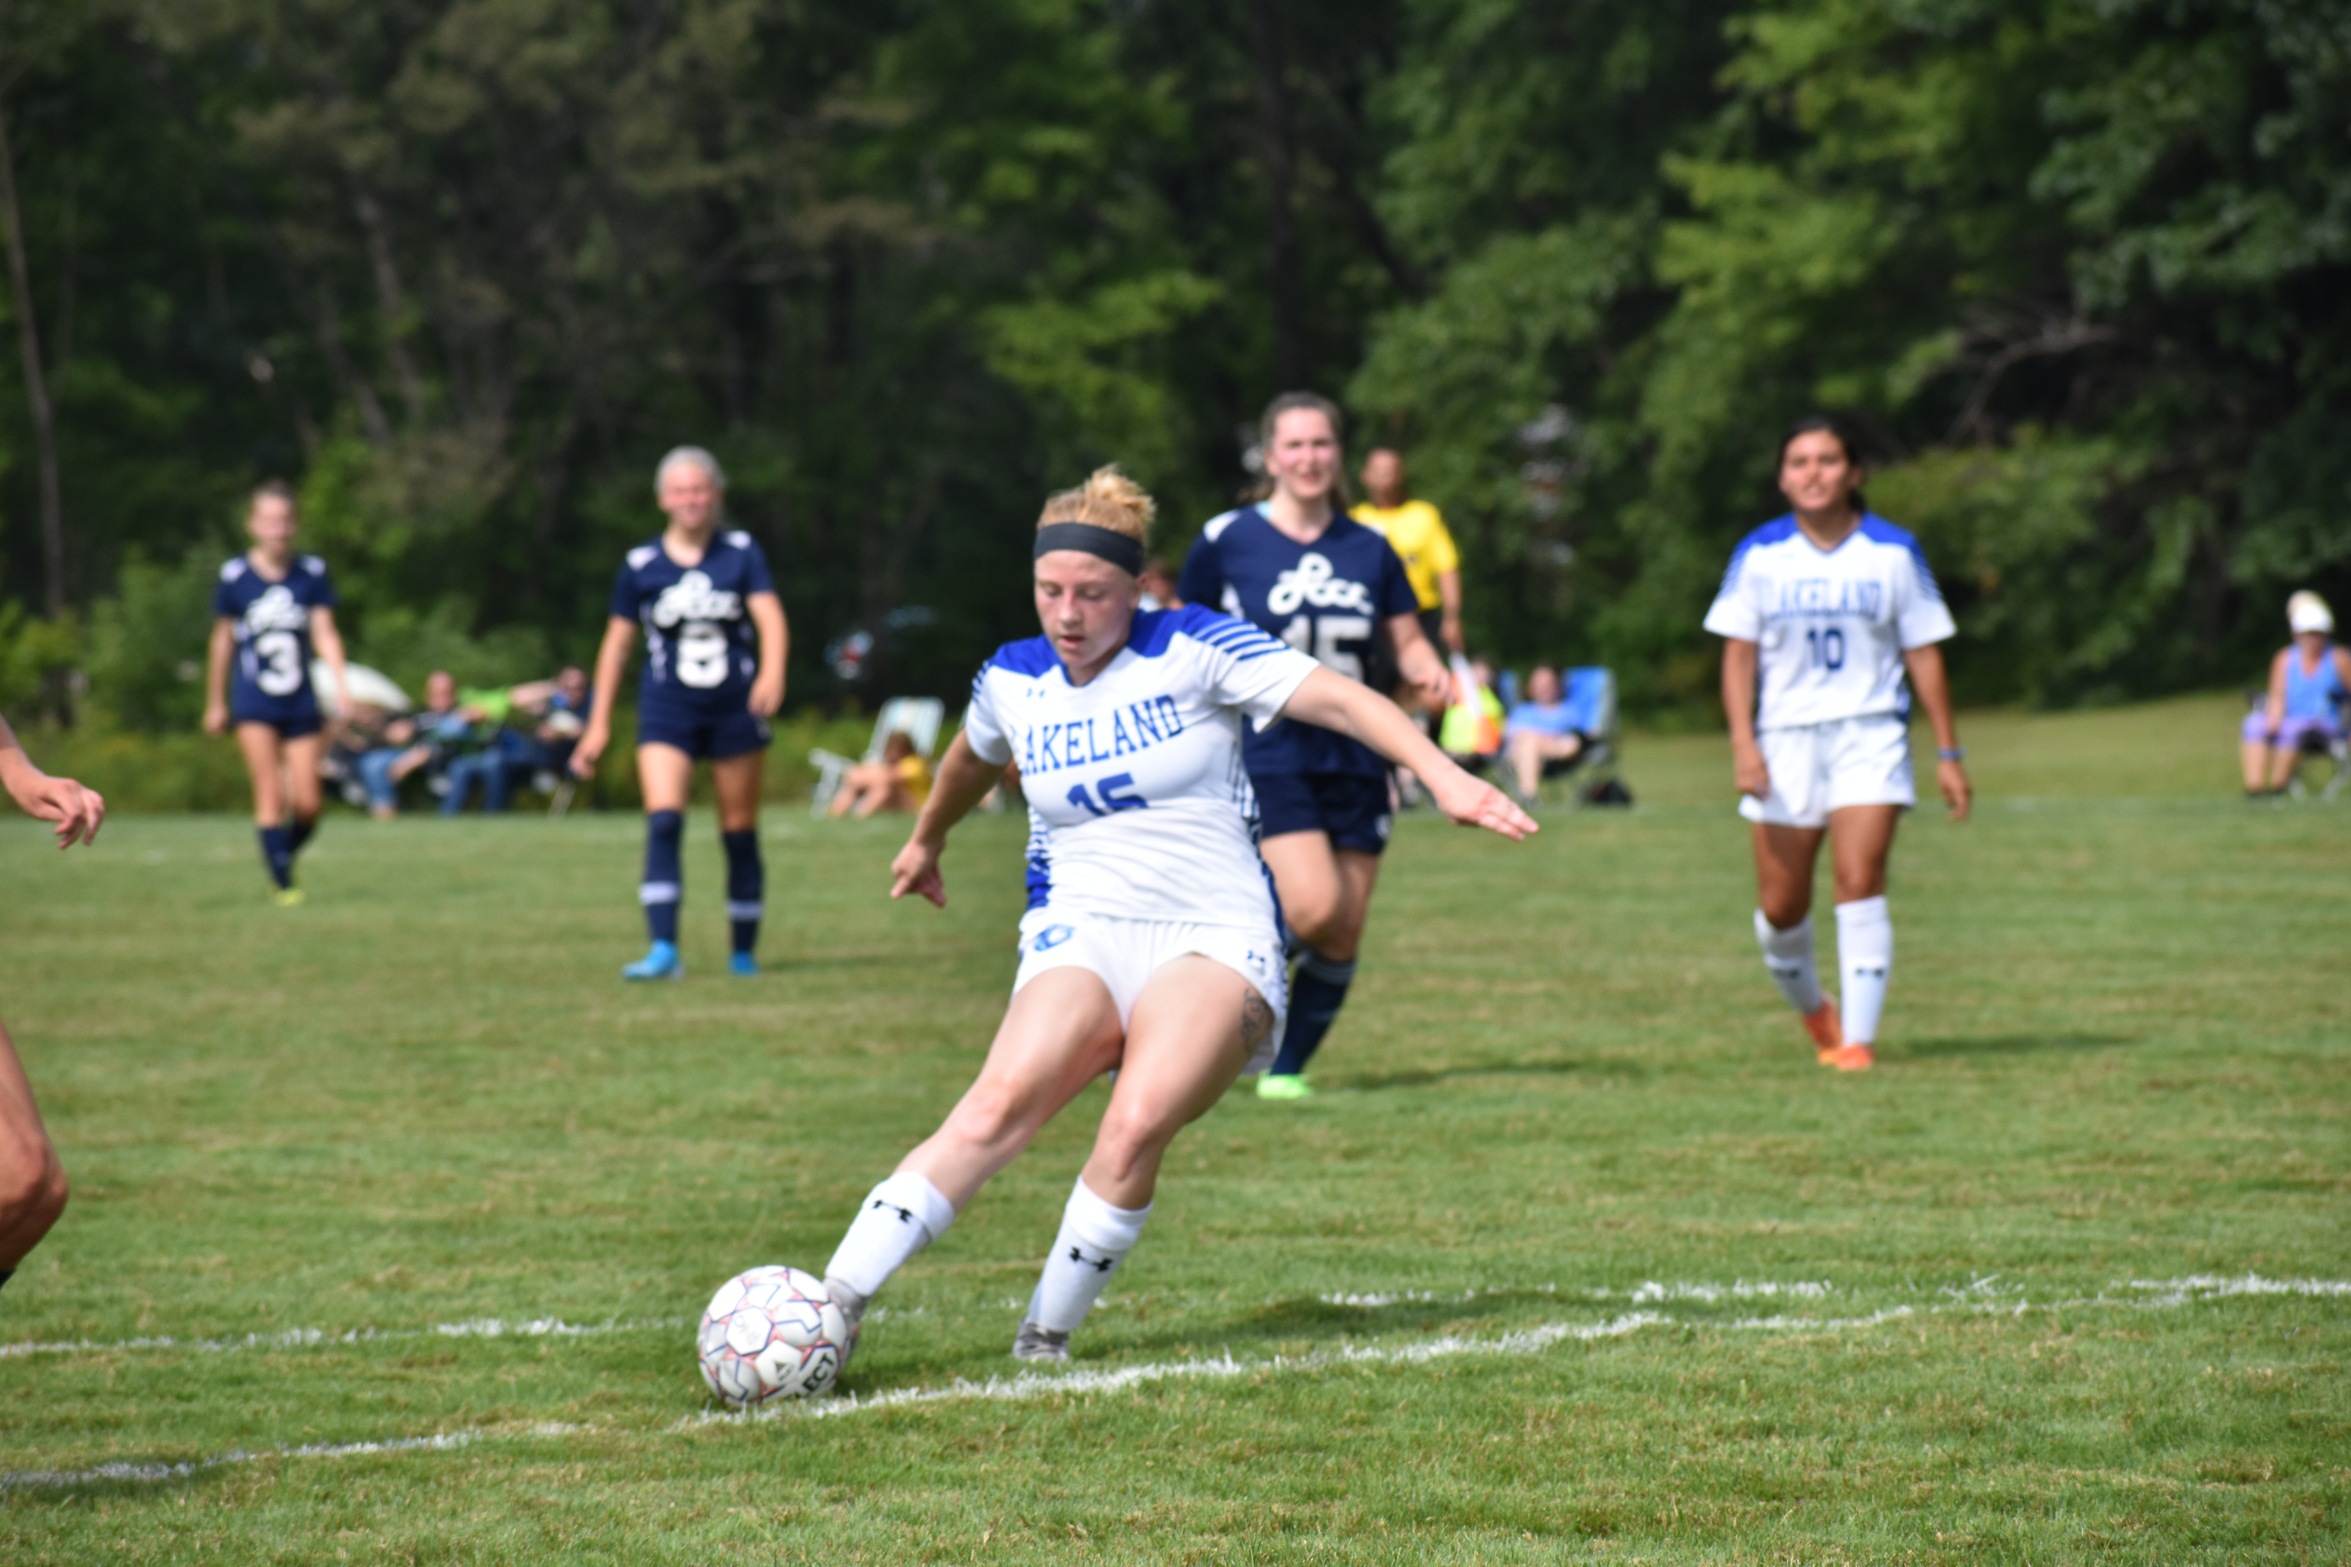 Lady Lakers soccer falls 2-1 to Redhawks